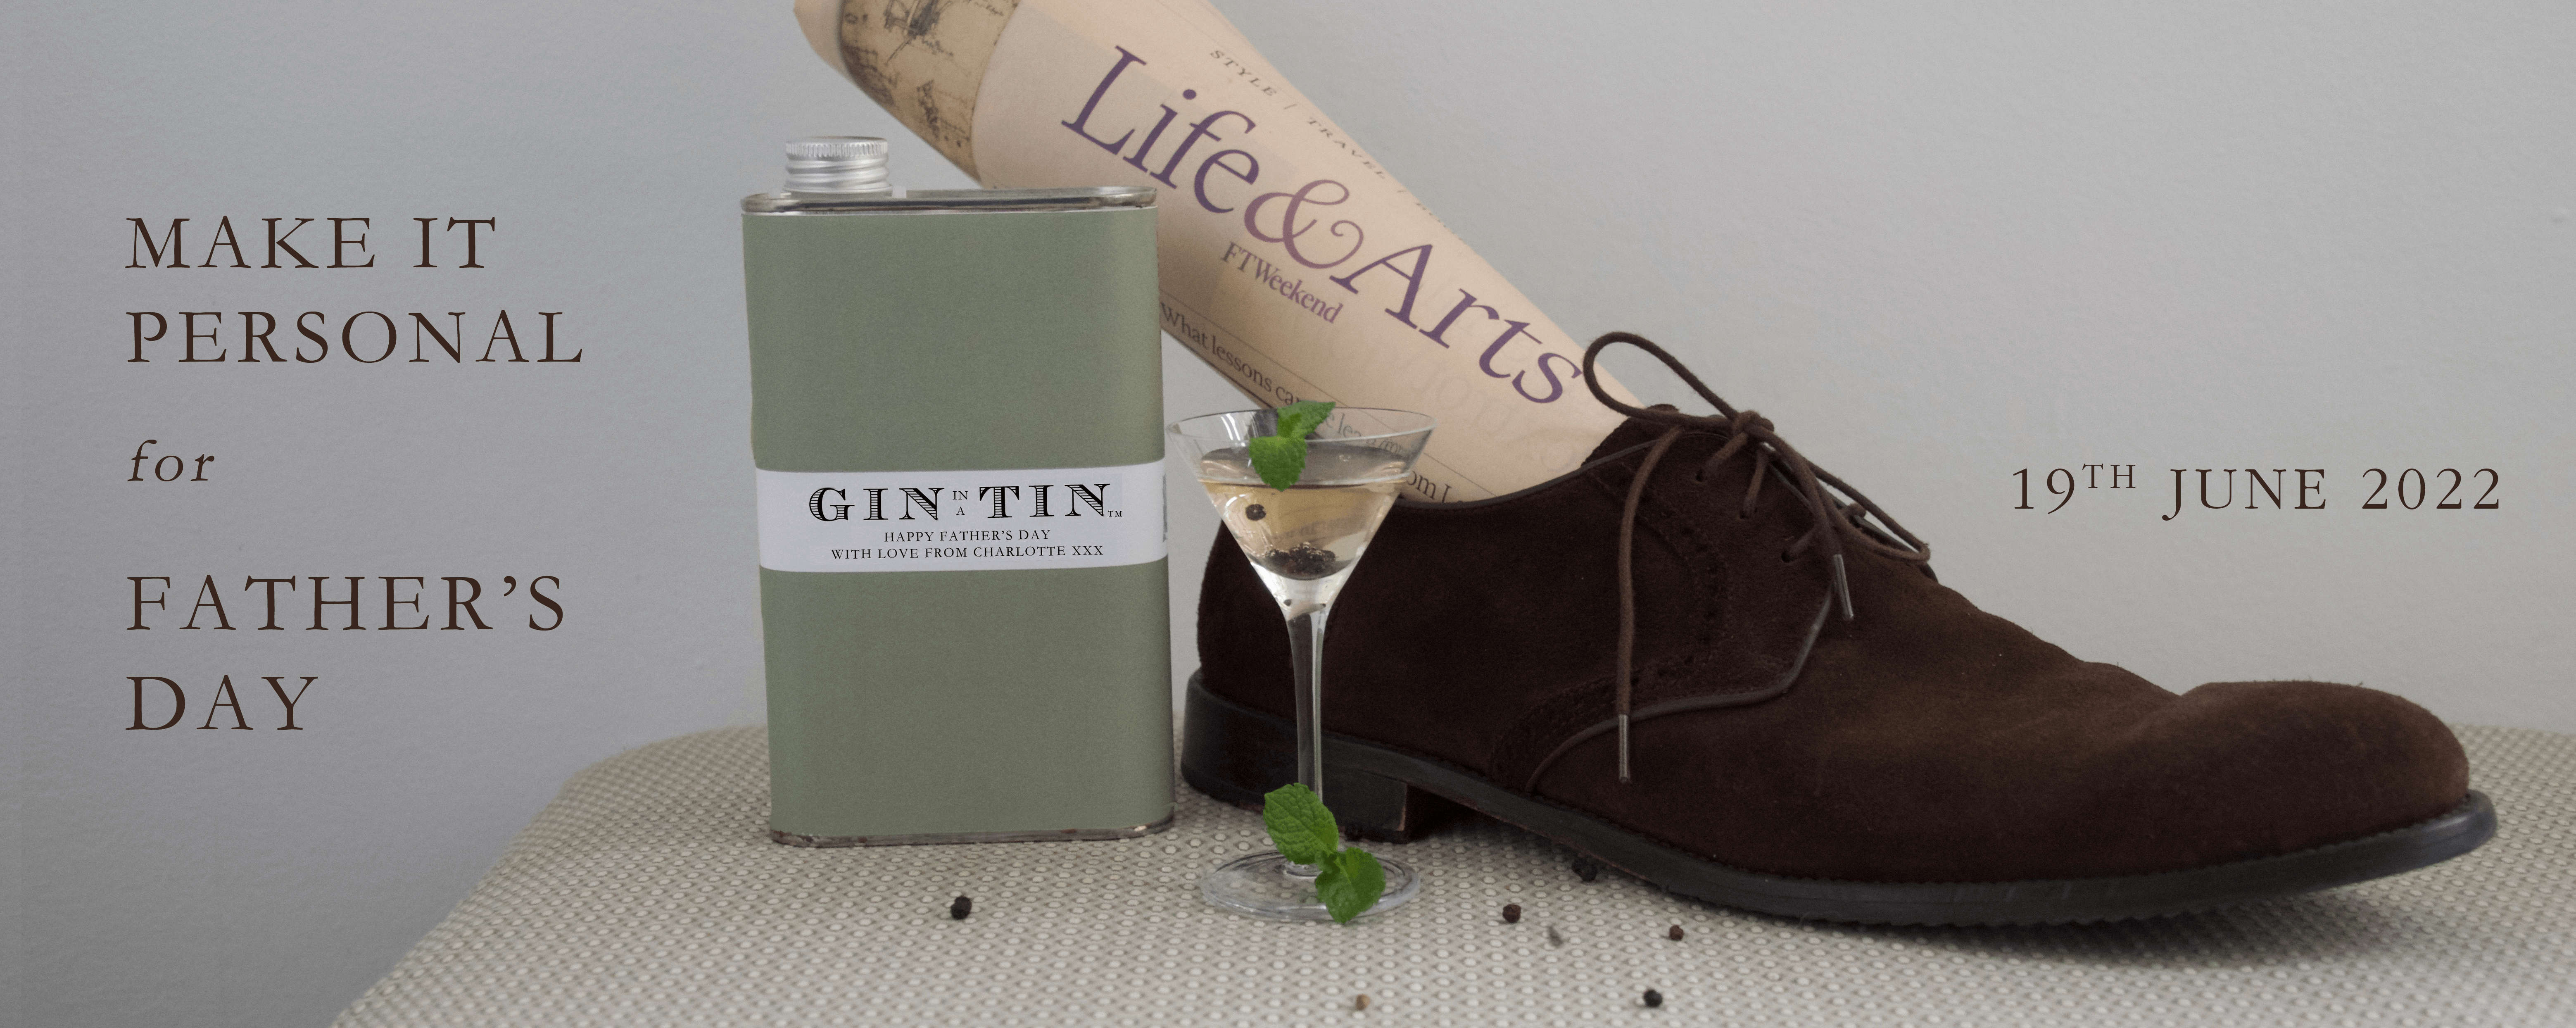 GIN IN A TIN - Father' Day 2022 - HOME PAGE